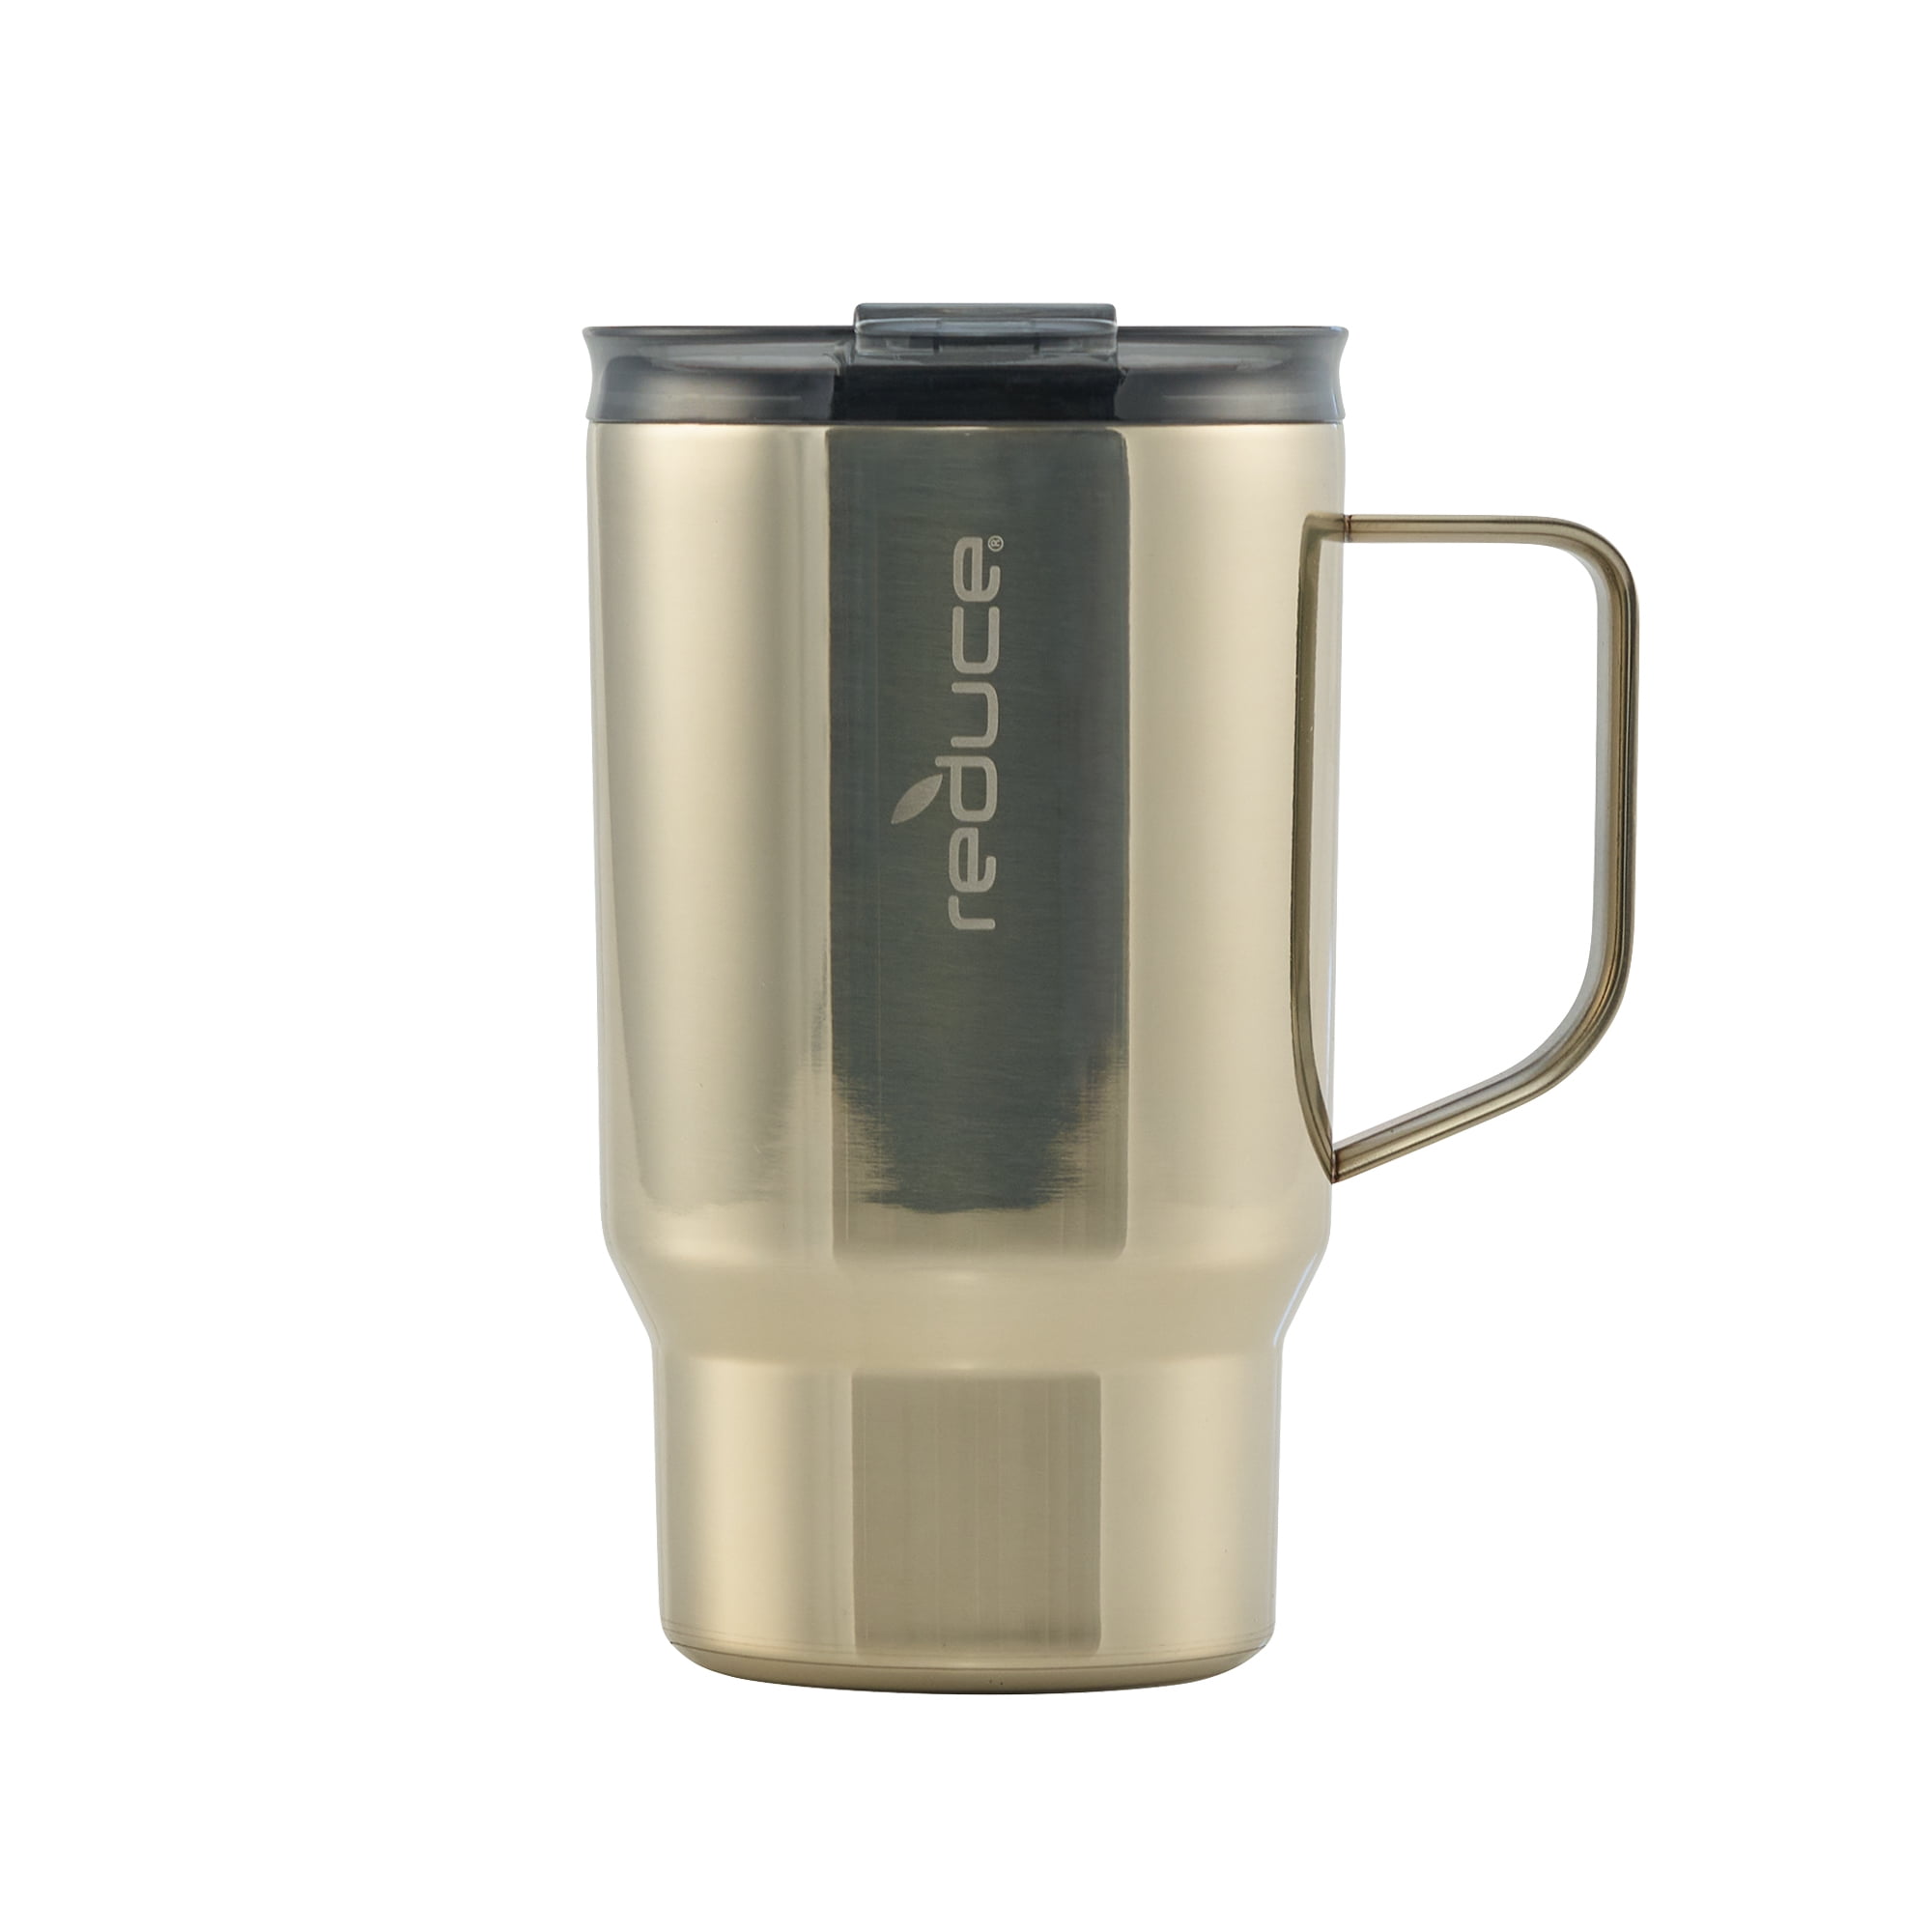 Reduce Travel Coffee Mug, 18 oz - Insulated Mug for Hot Tea, Coffee and  Other Hot Drinks - With Flo-…See more Reduce Travel Coffee Mug, 18 oz 